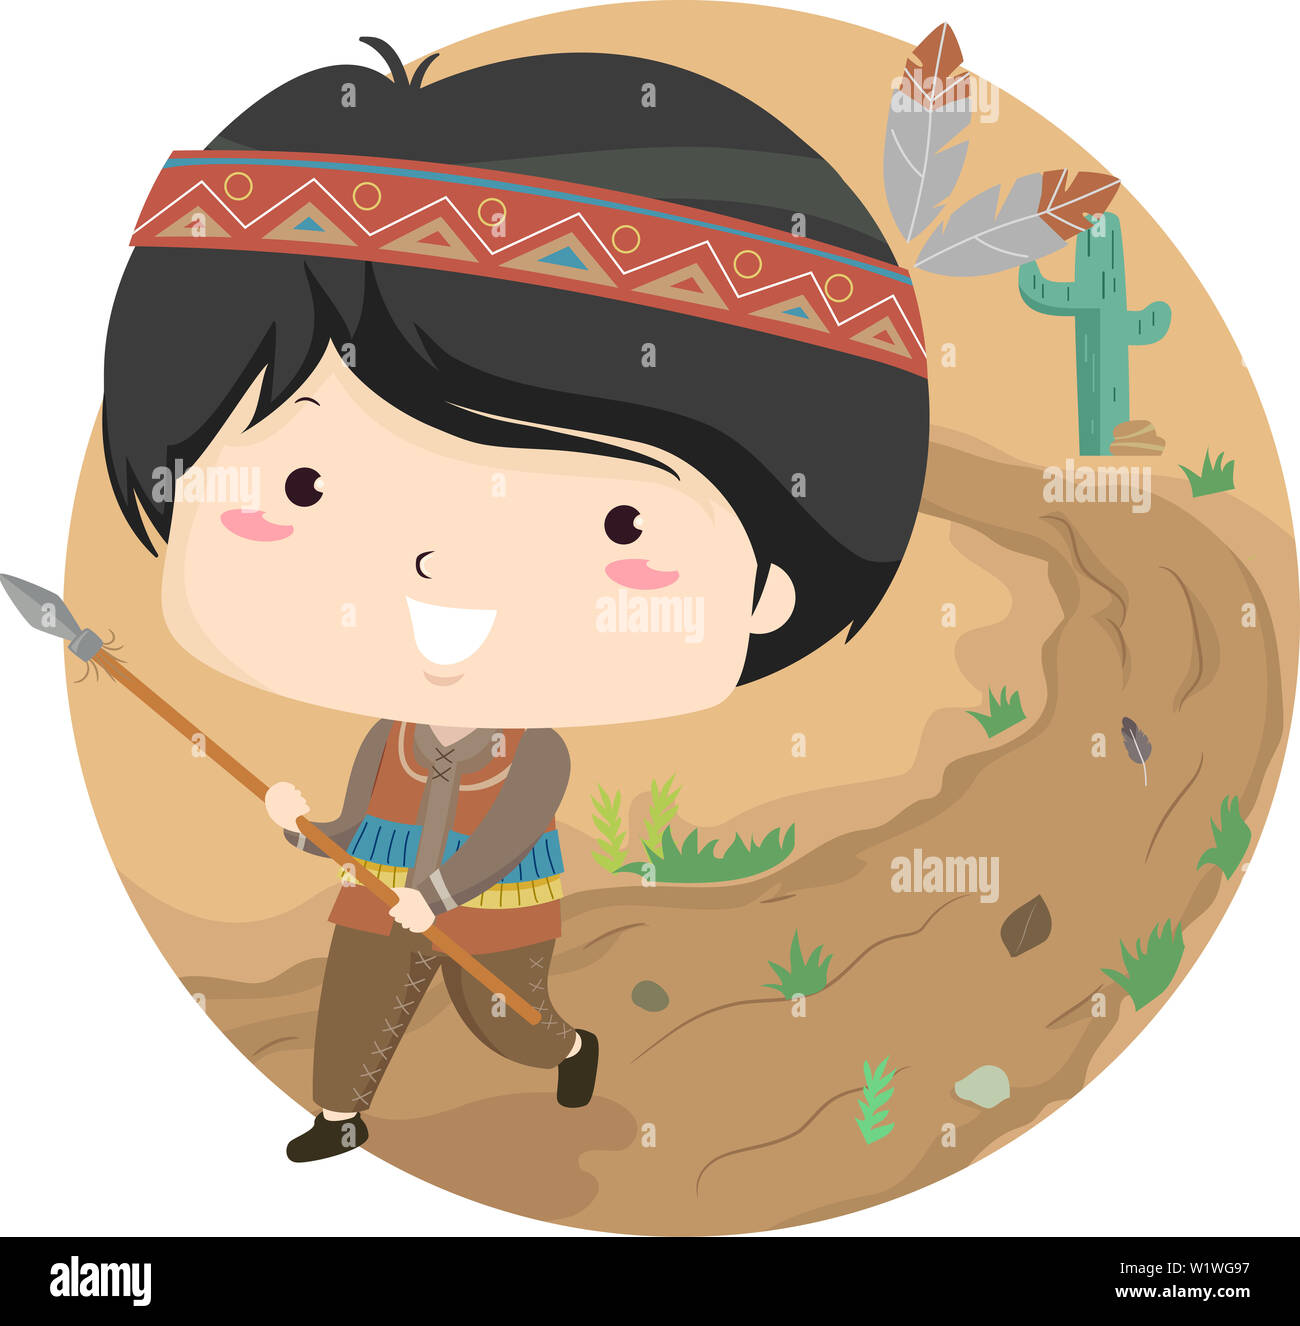 Illustration of a Native American Kid Boy Walking Down a Path Holding a Spear Stock Photo